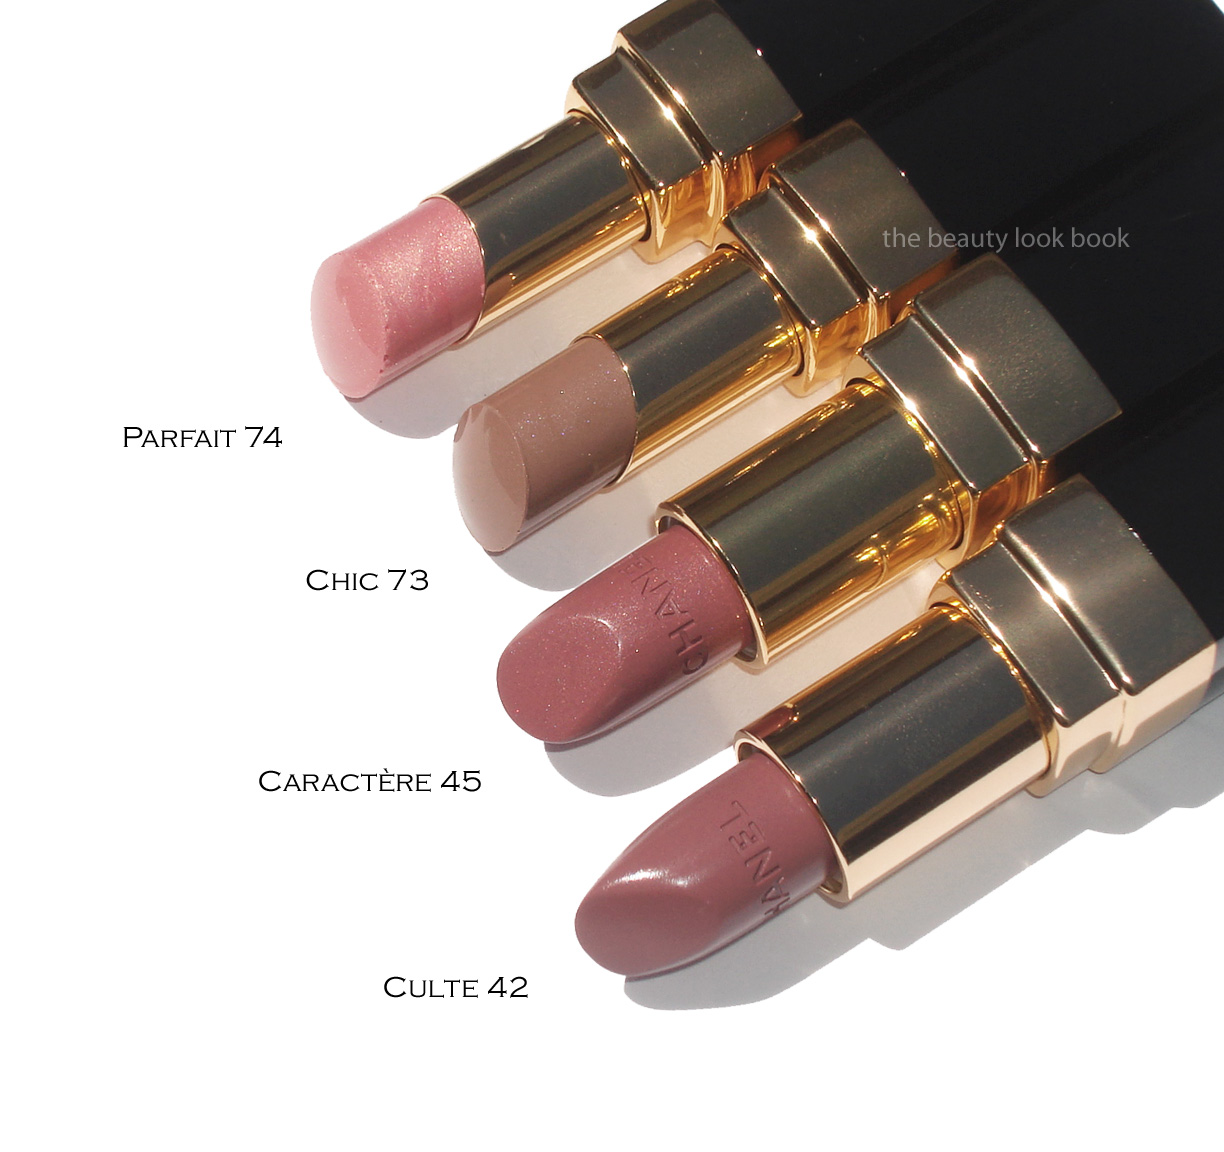 Say Hello To Chanel's Latest Rouge Coco Flash Lipstick